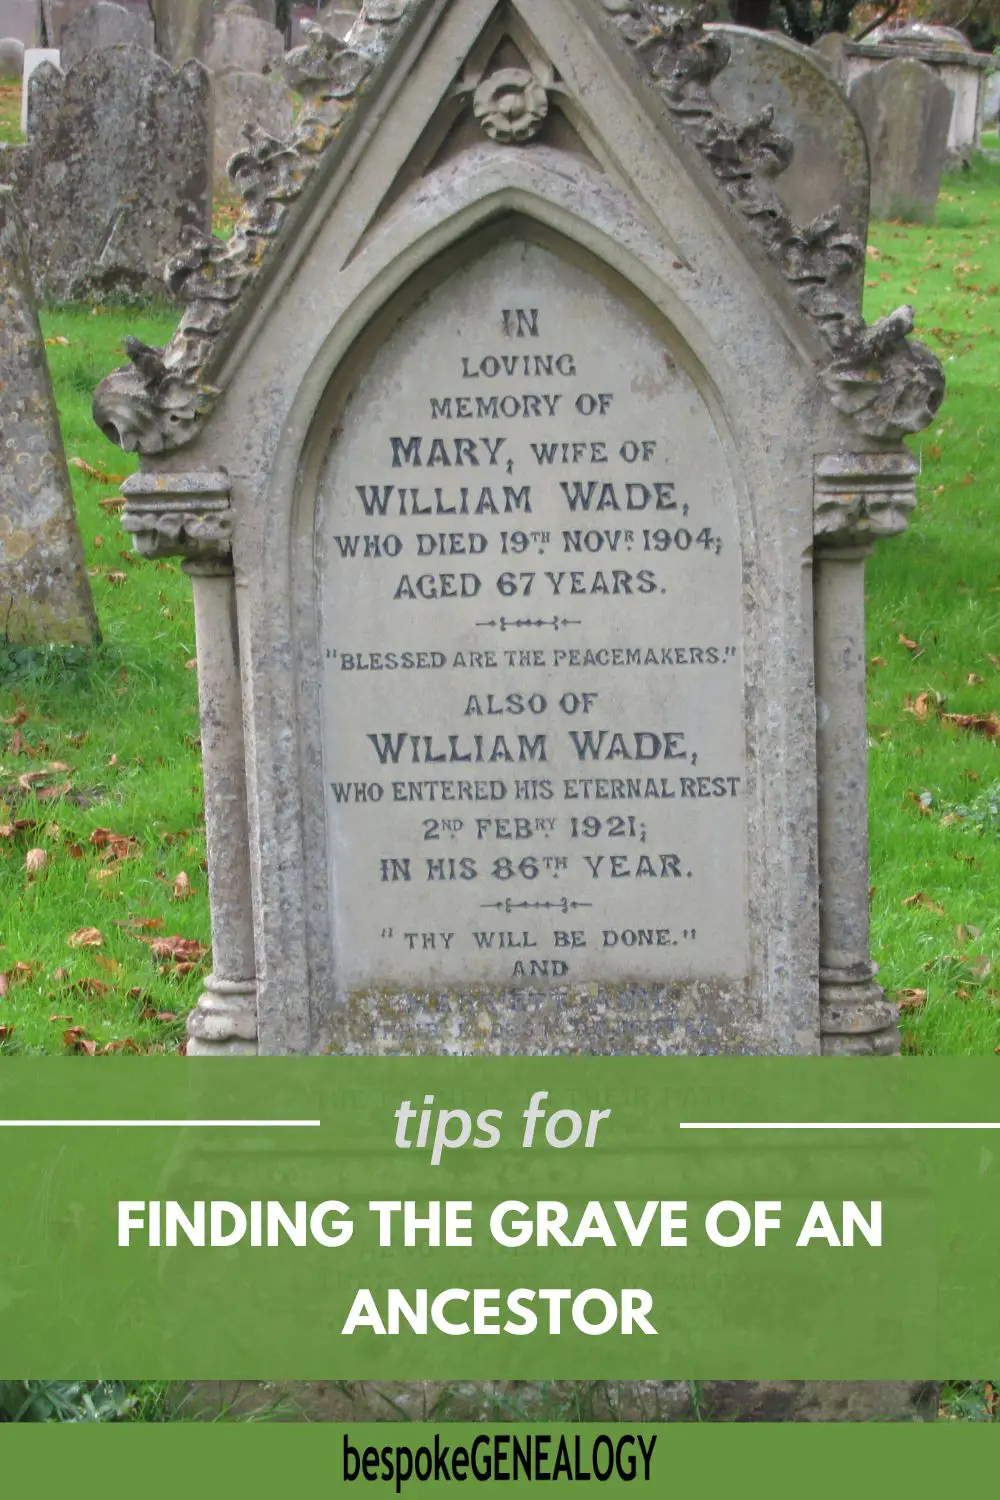 Tips for finding the grave of an ancestor. Photo of a gravestone in an English churchyard.